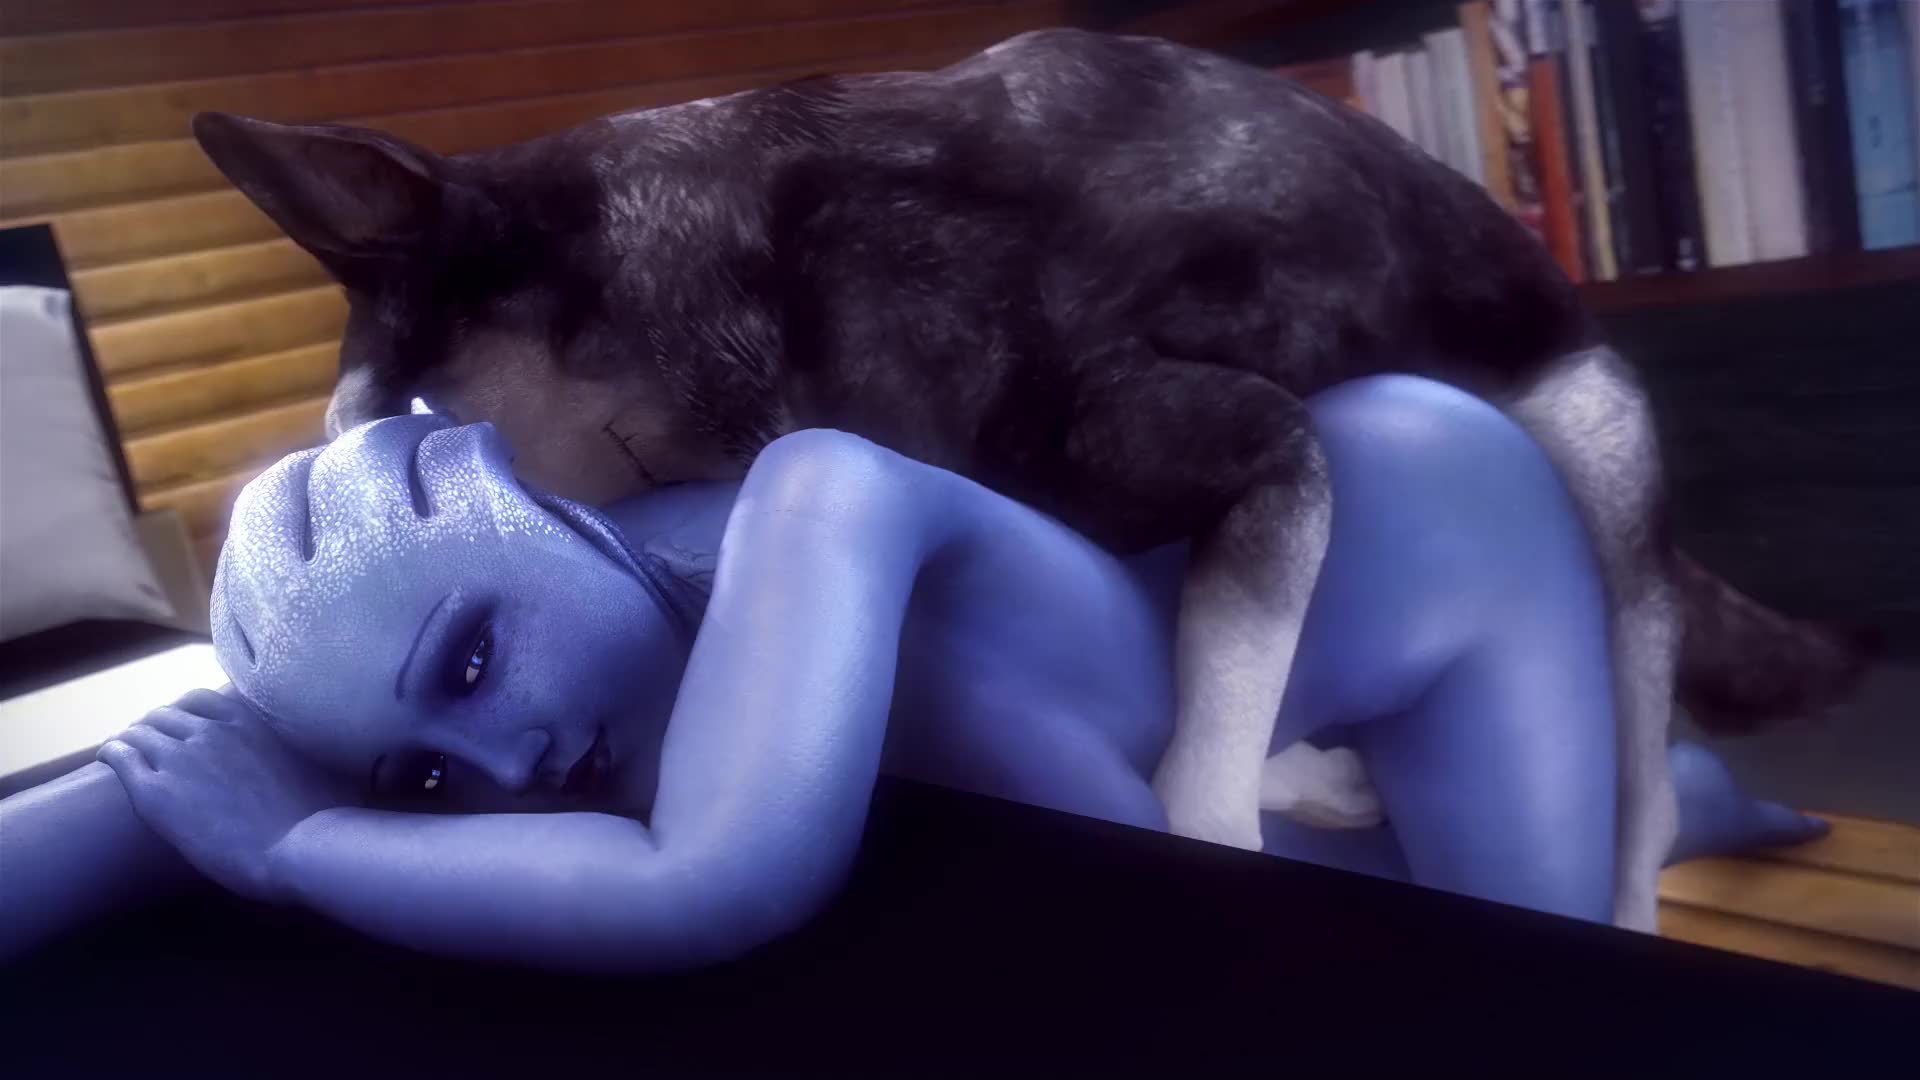 Liara T’soni Gets Dog Dick From Behind – Mass Effect NSFW animation thumbnail